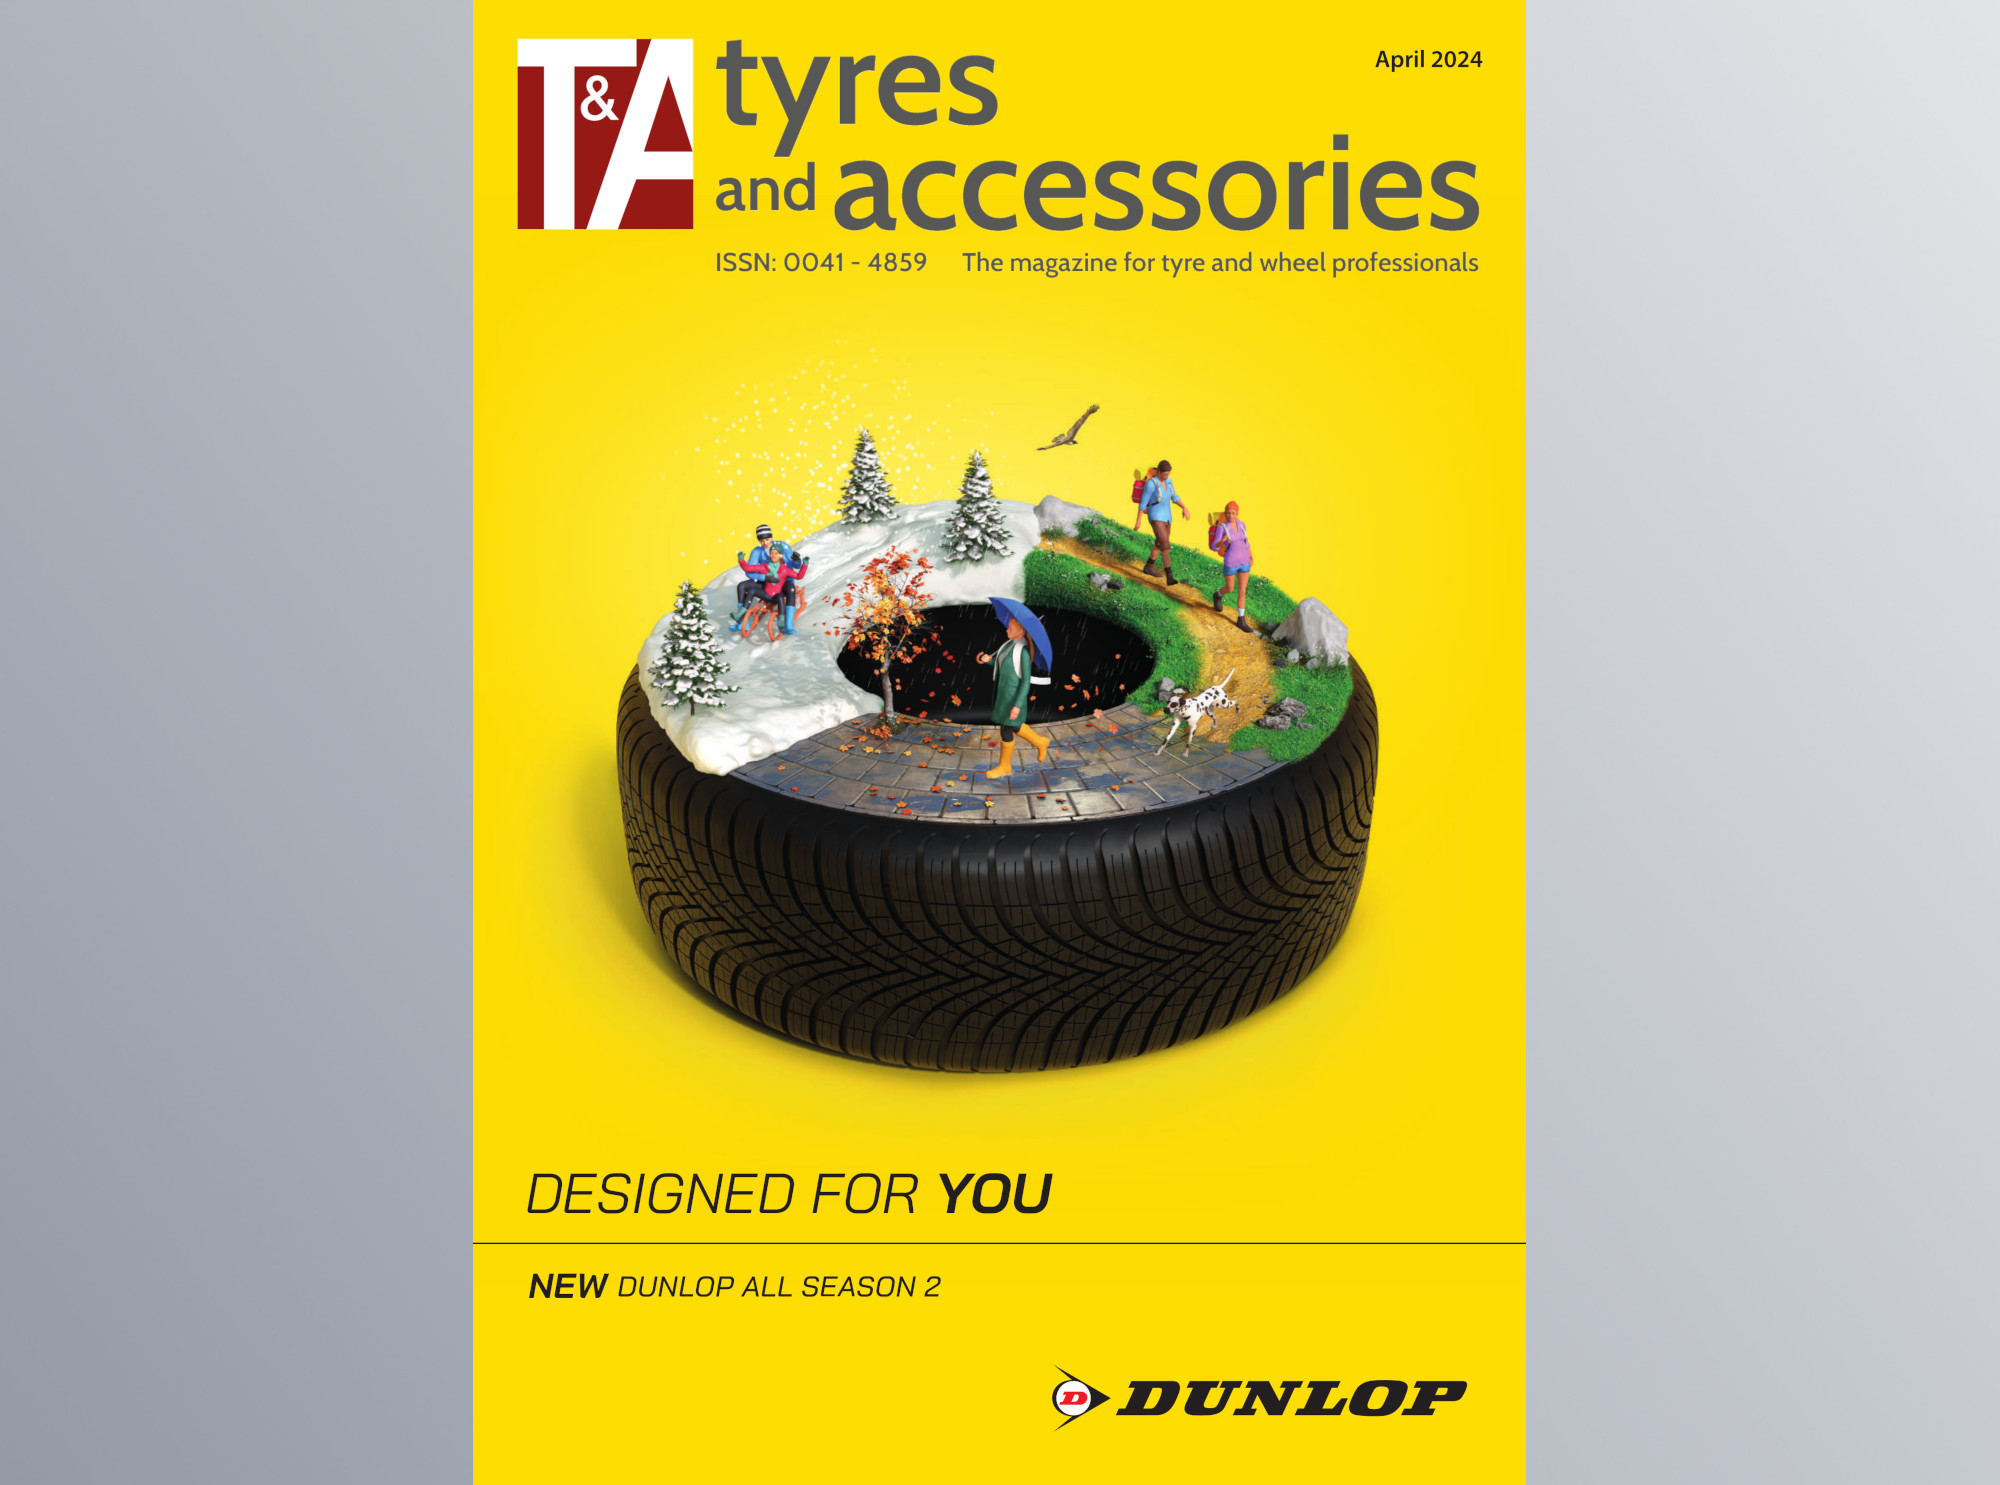 Read and download Tyres & Accessories Magazine April 2024 now